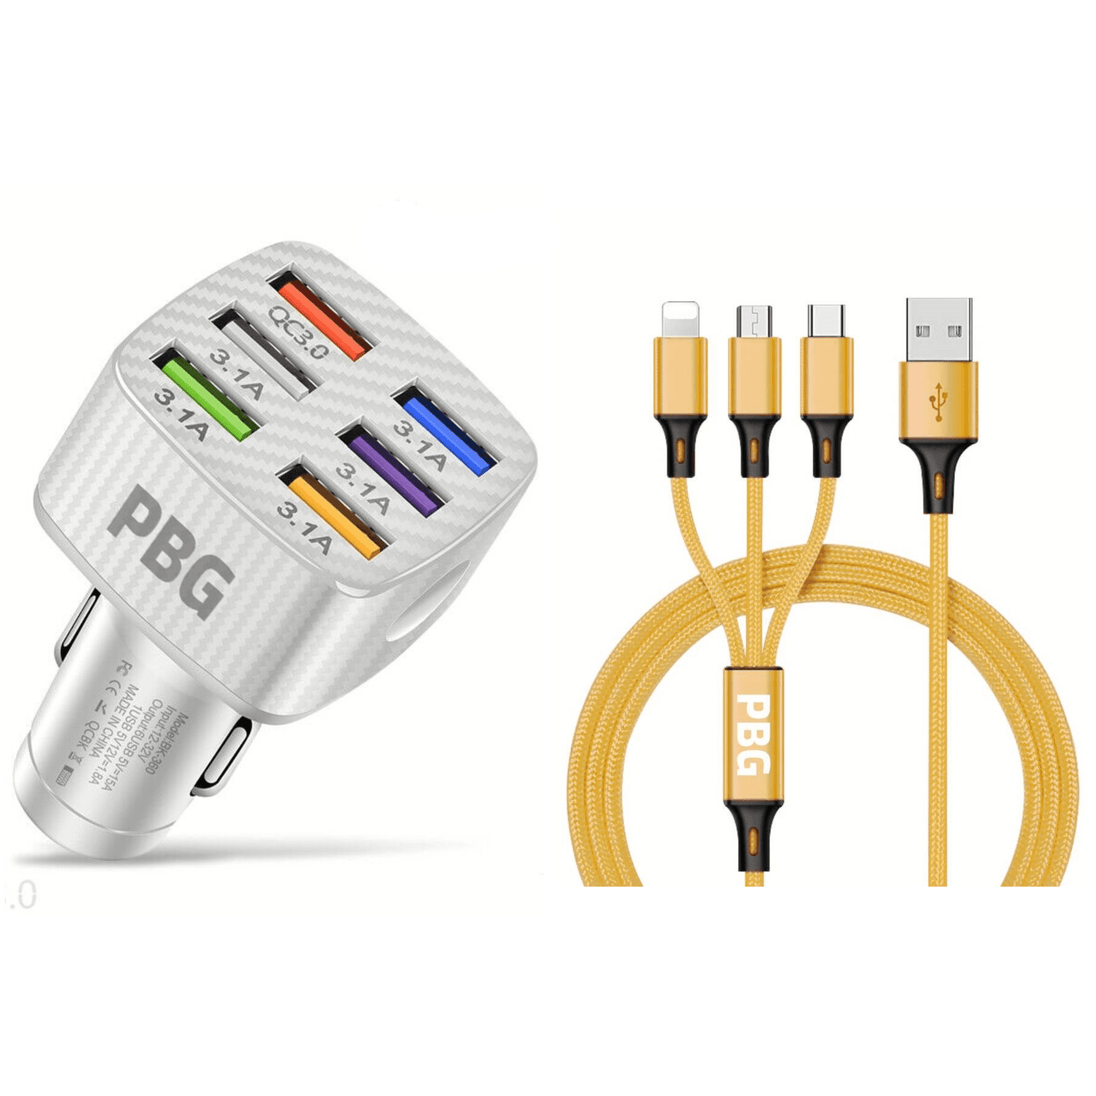 4ft 3-in-1 charging cable with LED 6-Port Car Charger